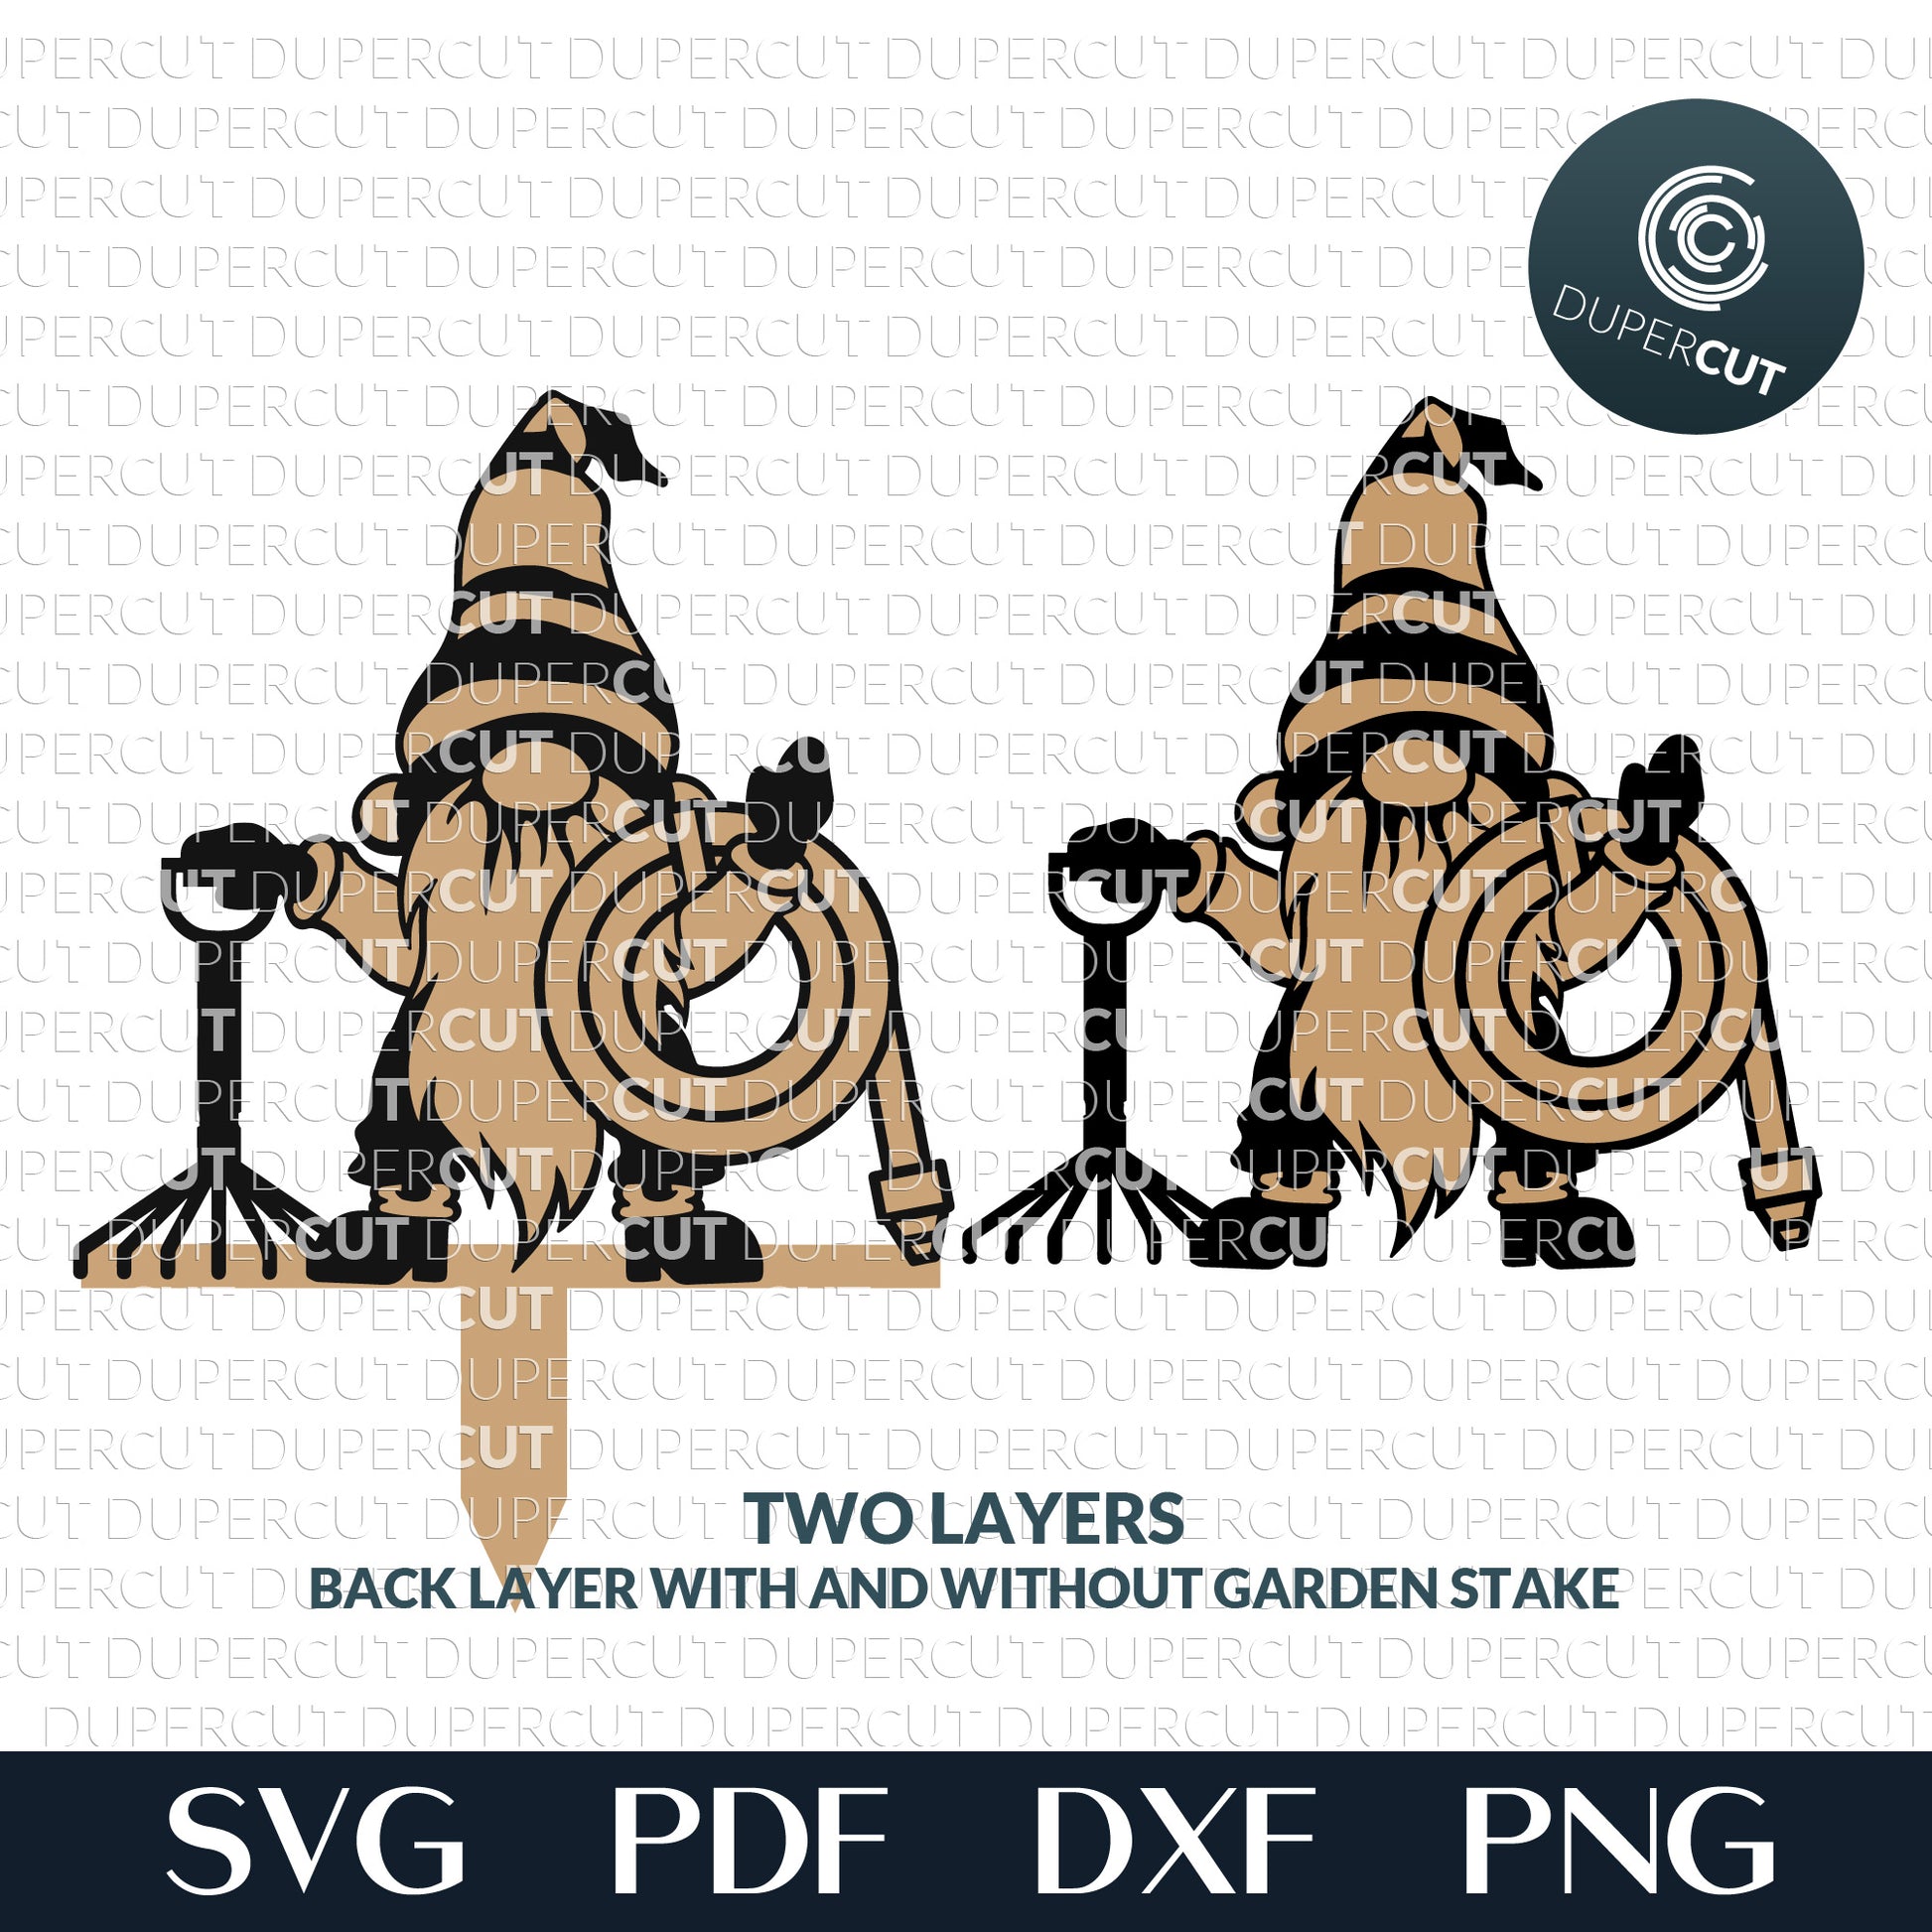 Garden gnome with hose and rake - SVG DXF layered cutting files for Glowforge, Cricut, Silhouette cameo, CNC pattern by DuperCut.com